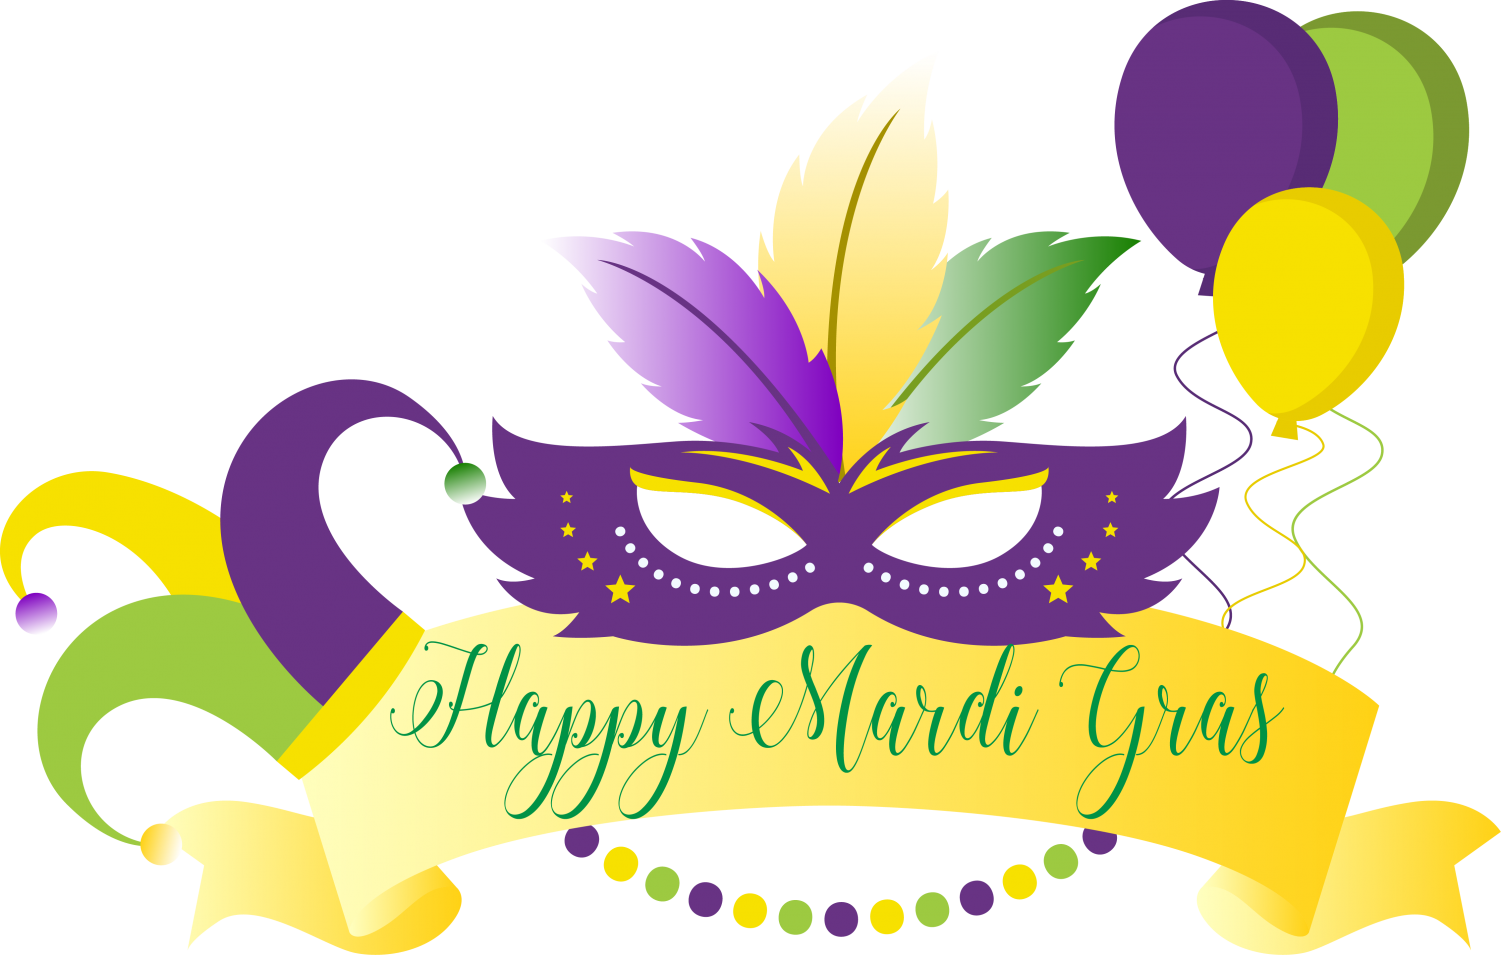 Mardi Gras Png Images PNG Image Collection